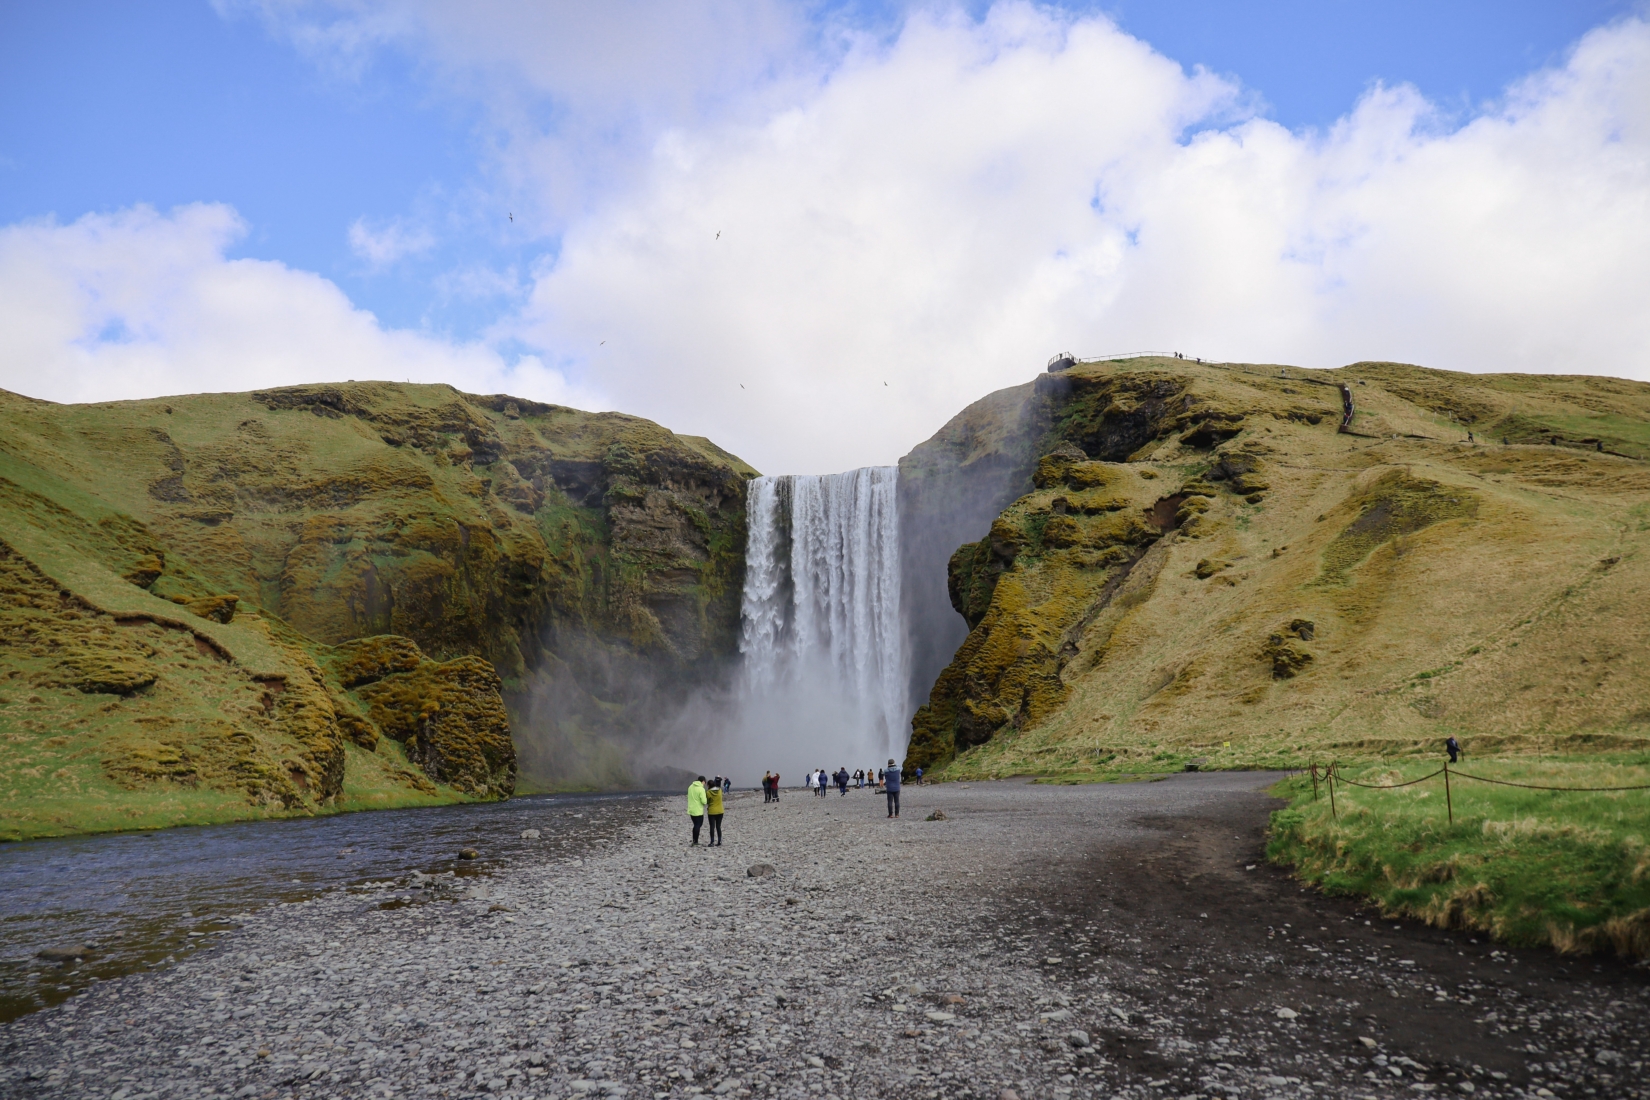 Located near Skógar, the spectacular Skógafoss waterfall is not to be missed